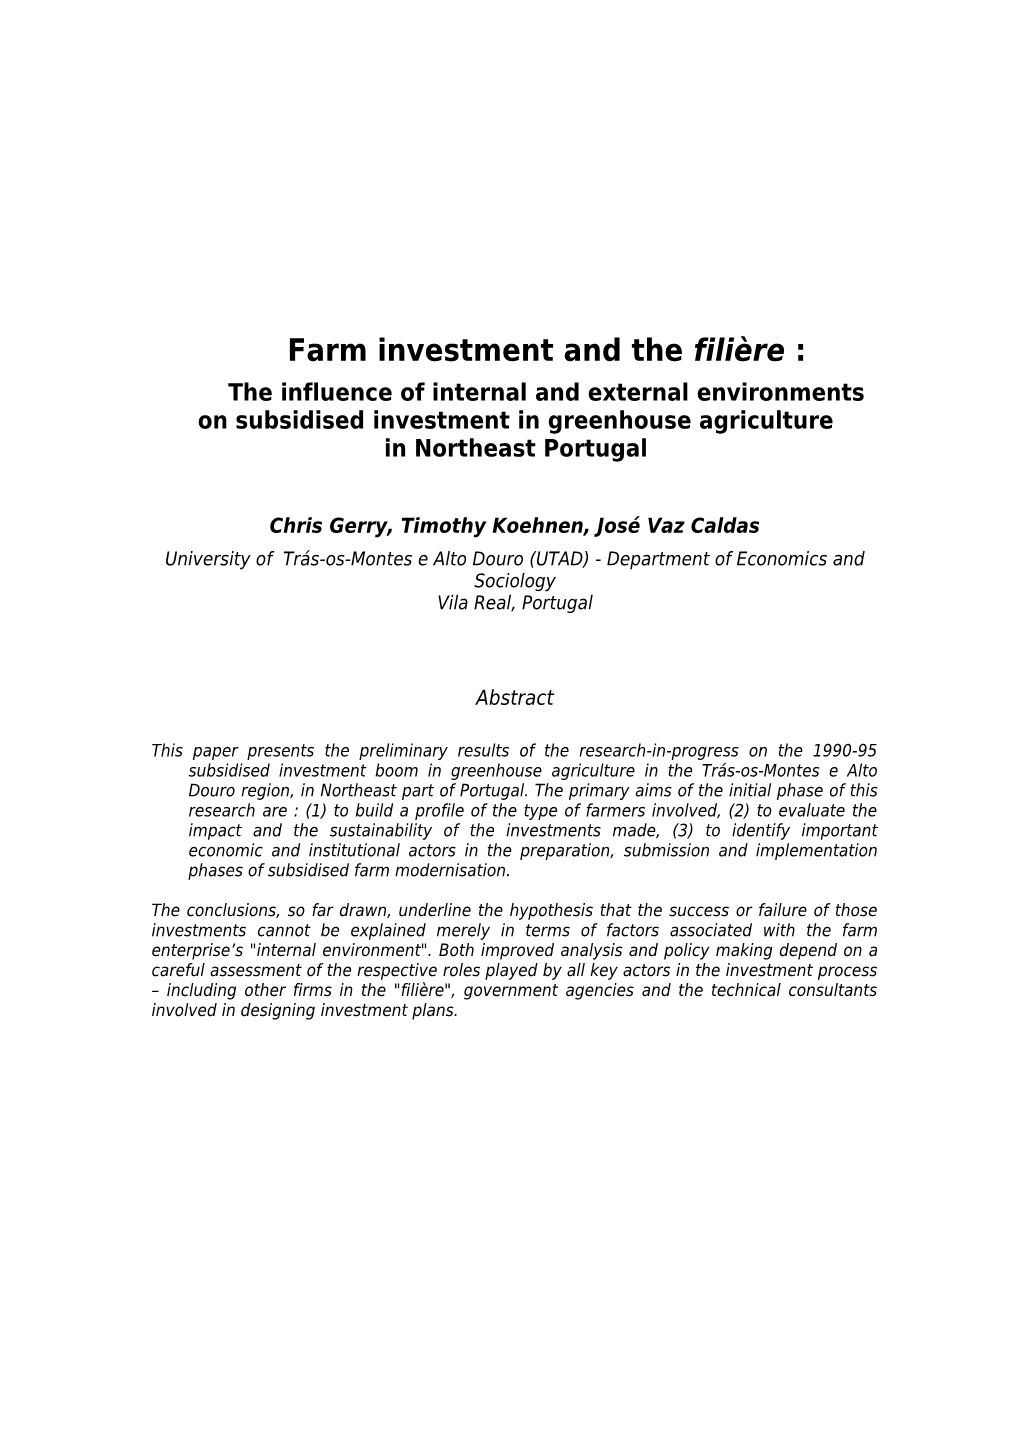 Farm Investment and the Filière